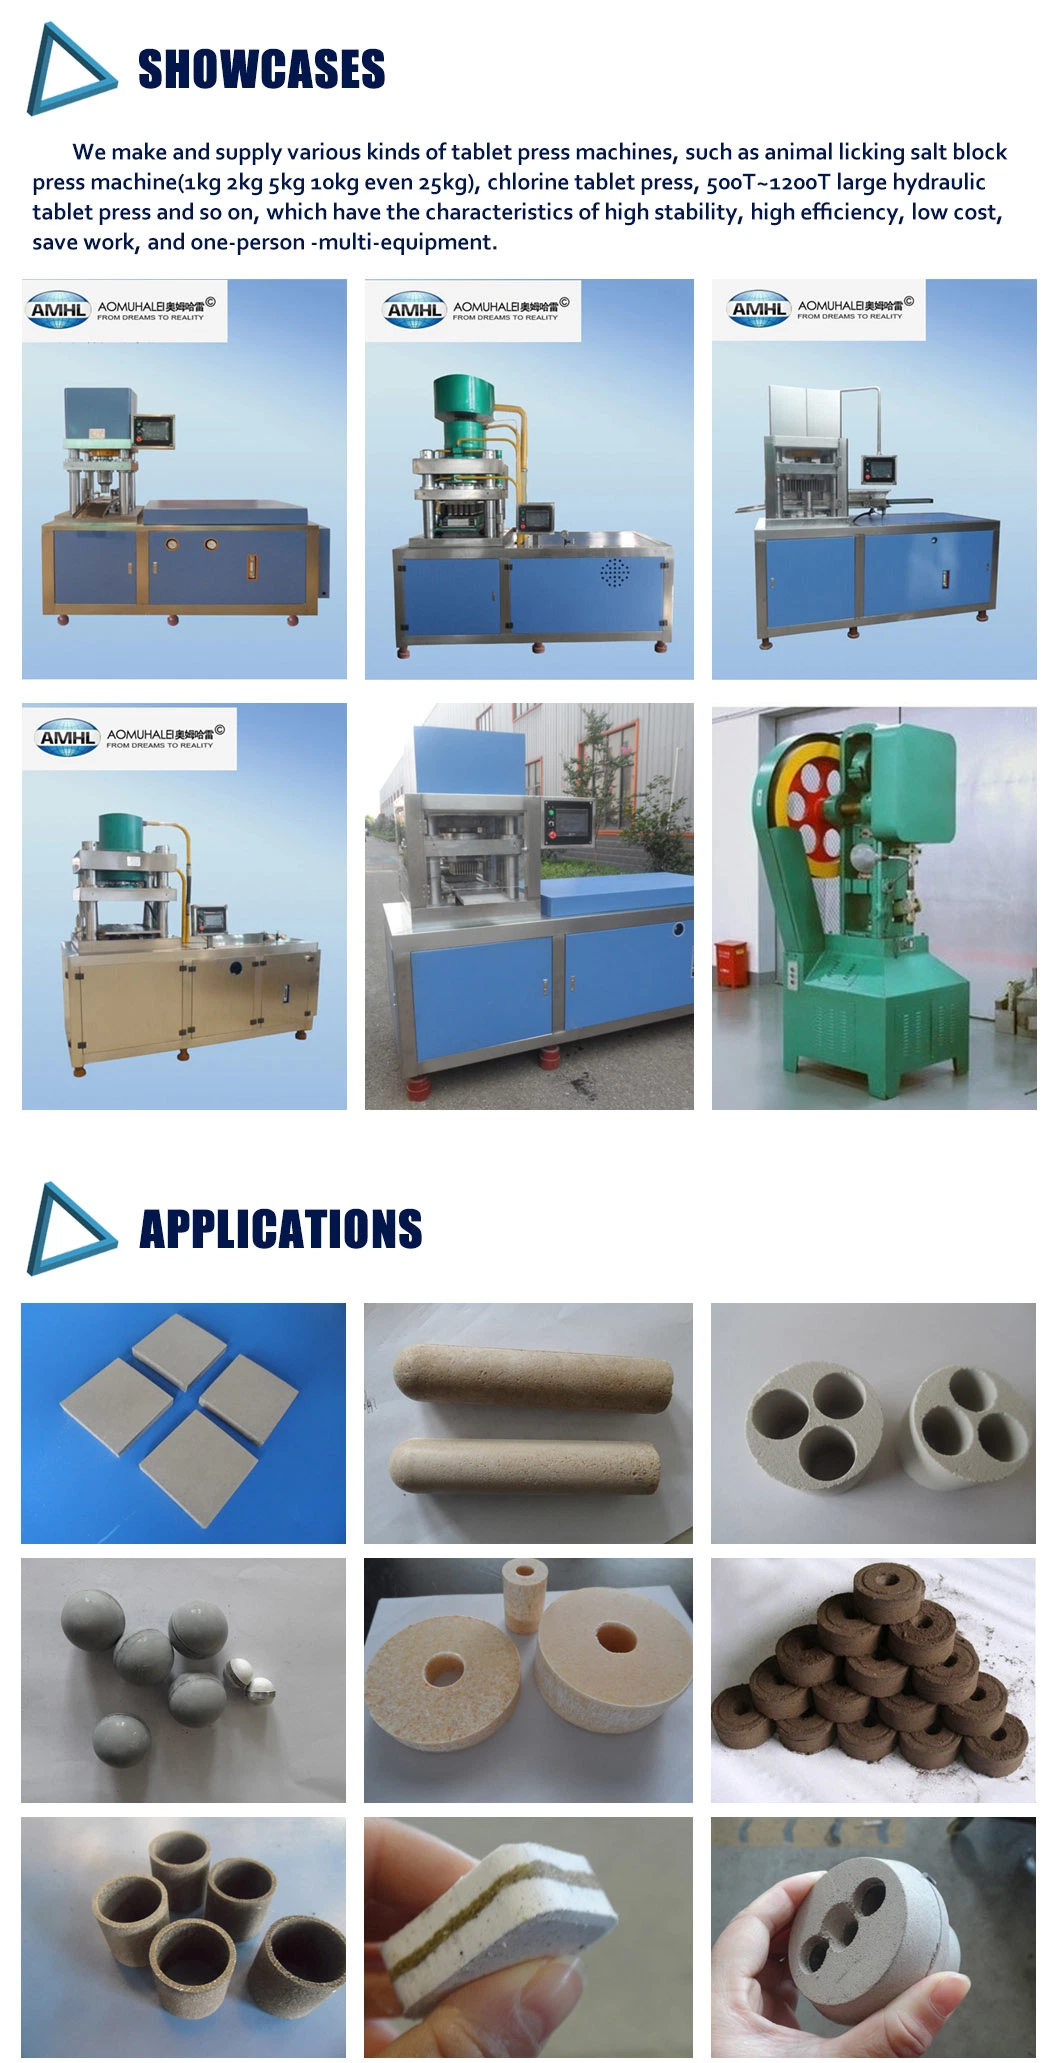 Automatic Animal Licking Block Large Hydraulic Single Punching Large Tablet Press for Calcium Chloride Table